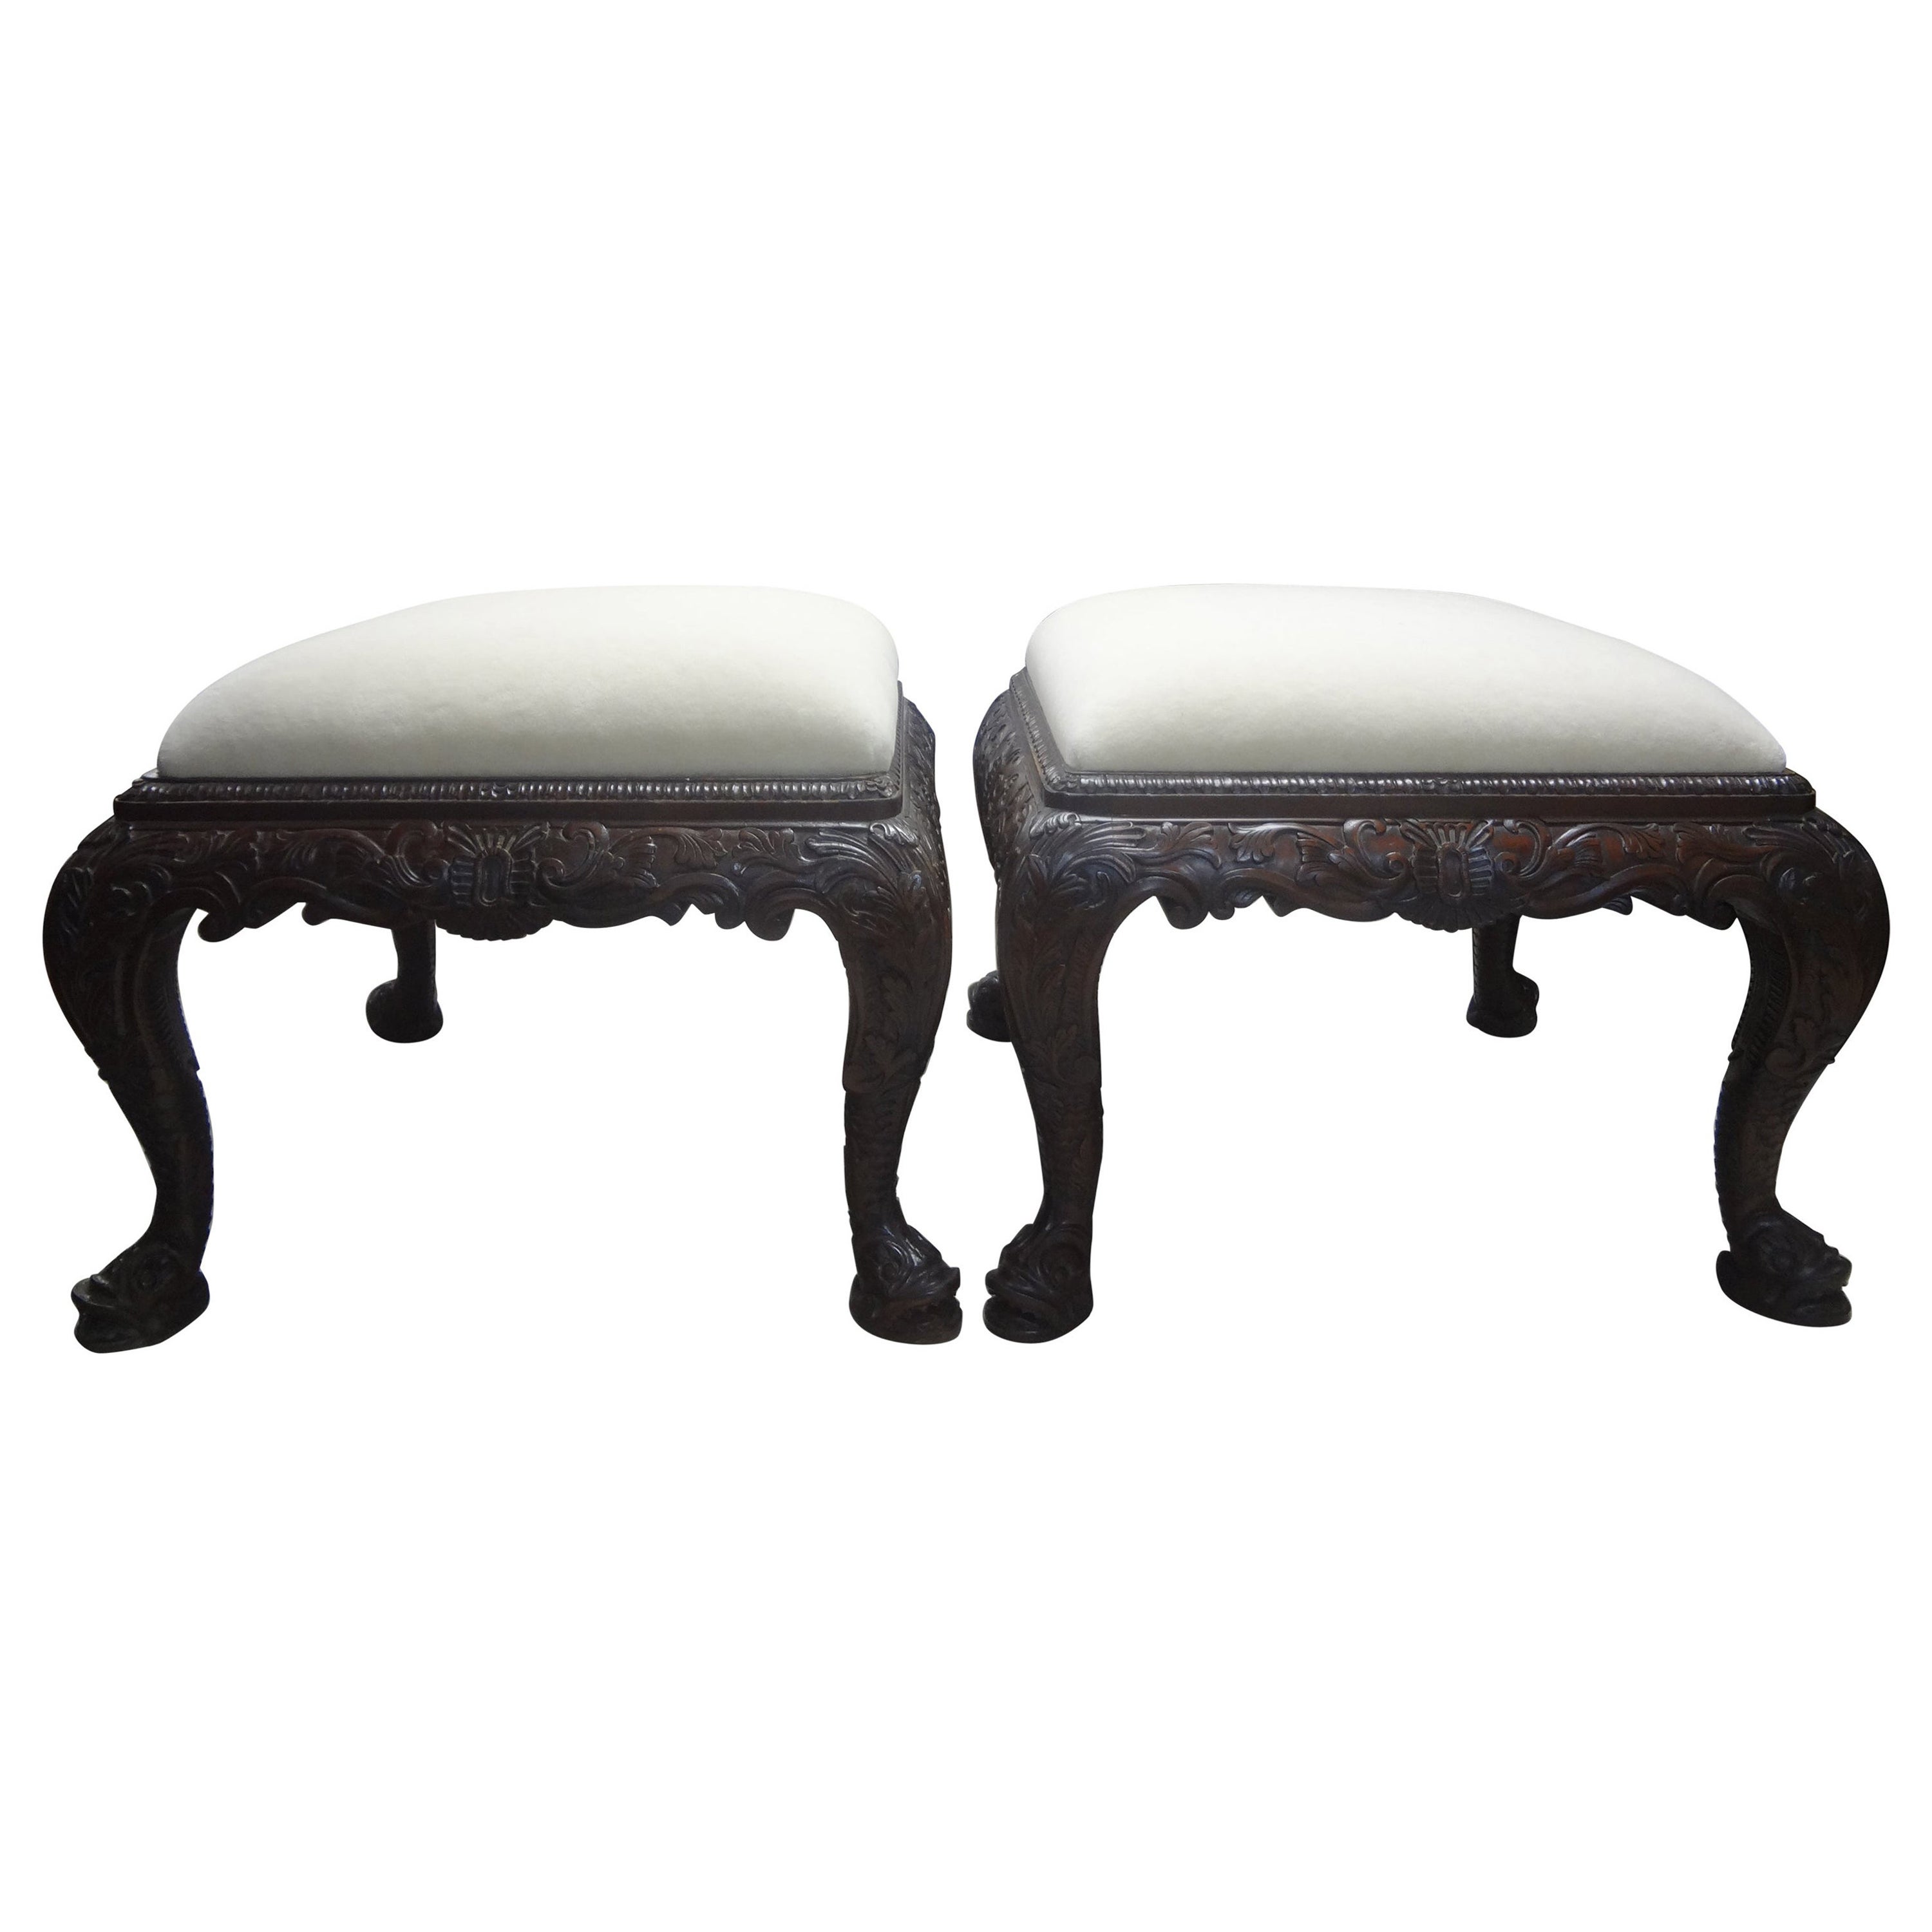 Pair of Large Scale Antique English Regency Style Ottomans with Dolphin Feet For Sale